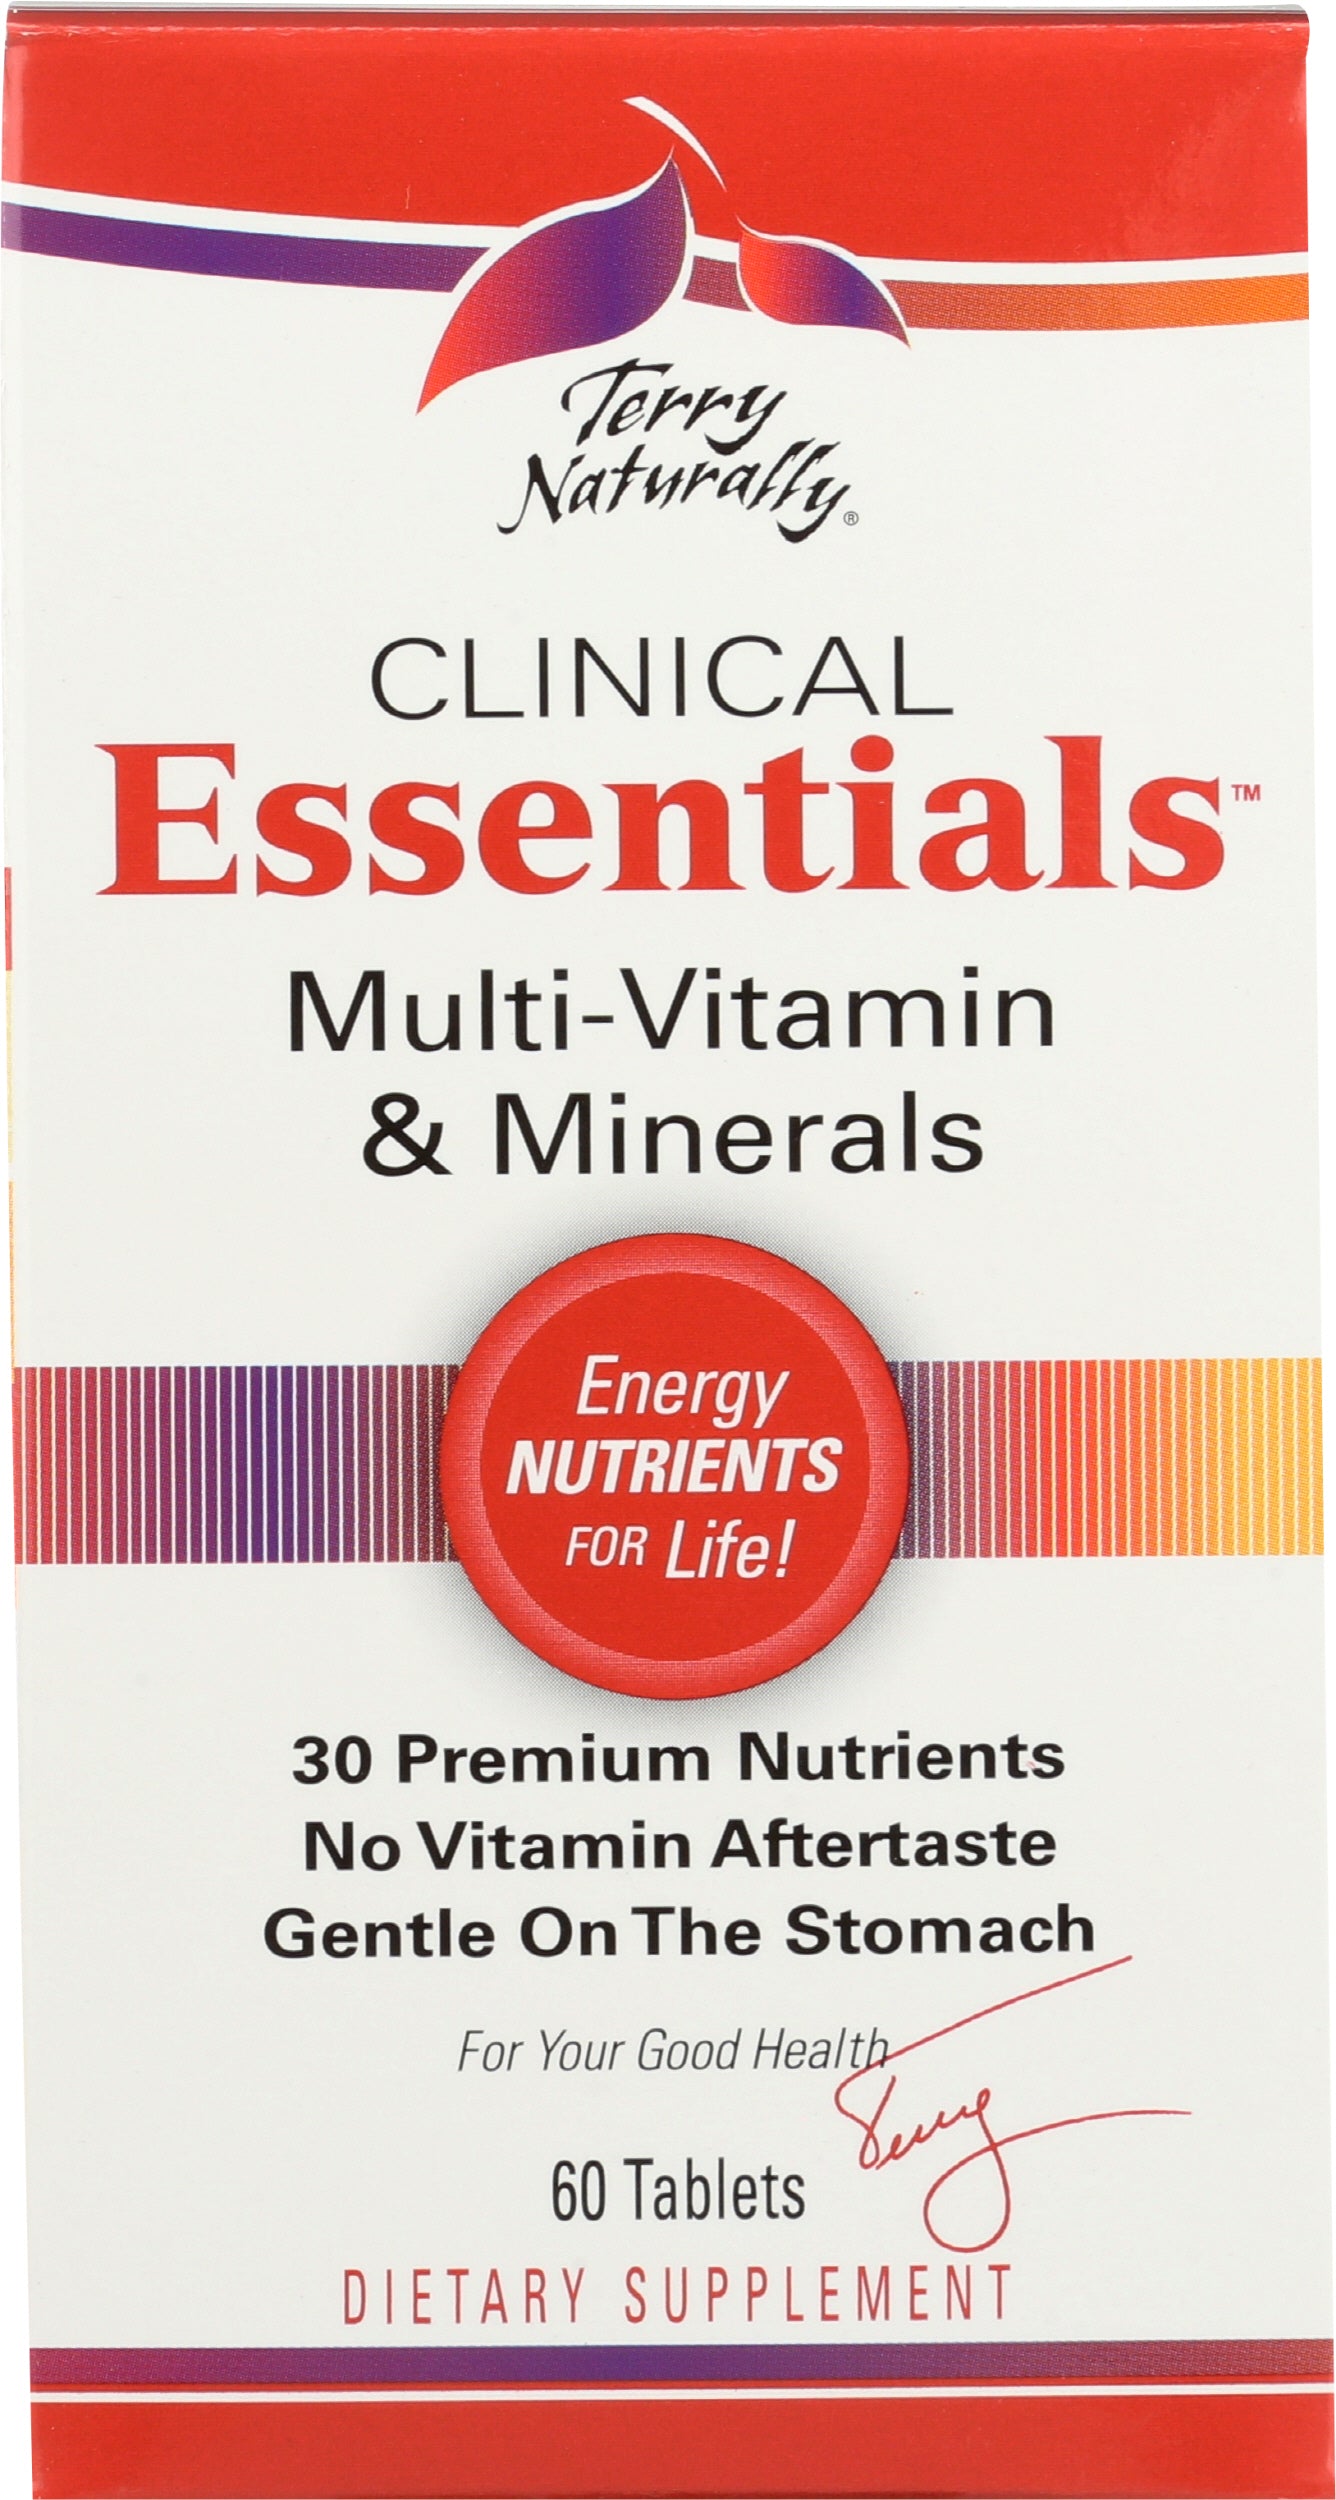 Terry Naturally Clinical Essentials Multi-Vitamin & Minerals 60 Tablets